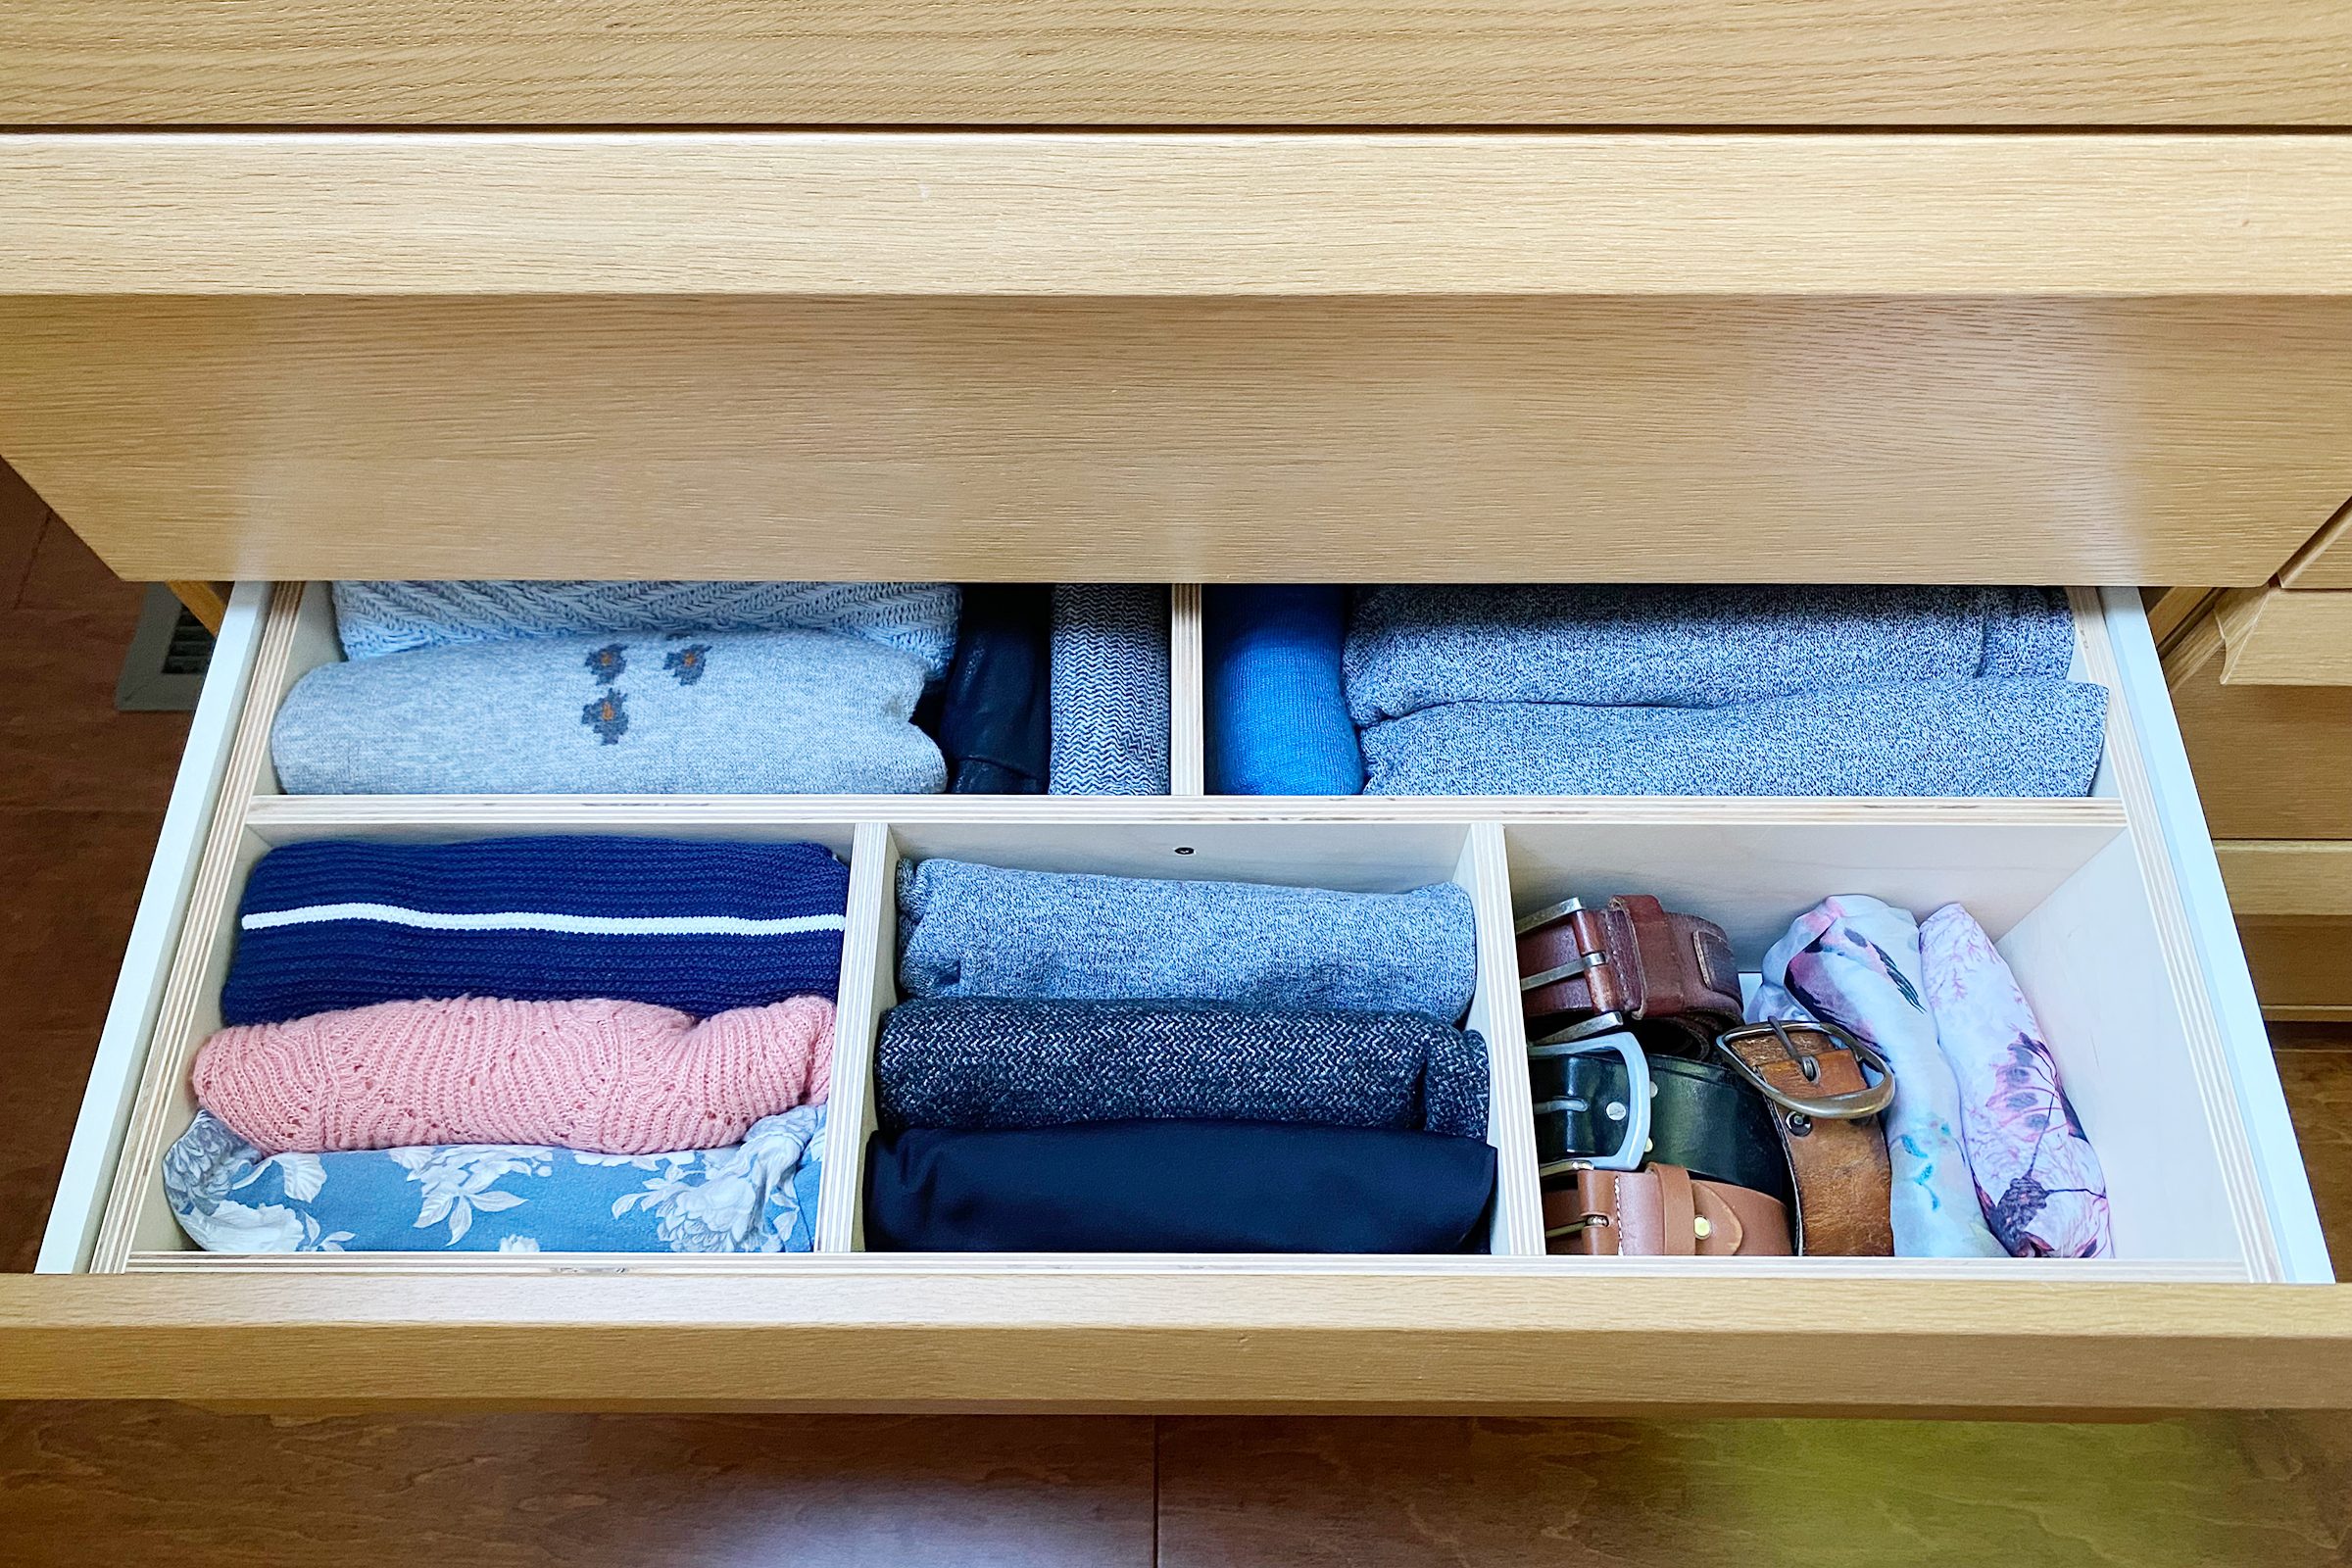 Drawer organisers: How to organise your drawers properly